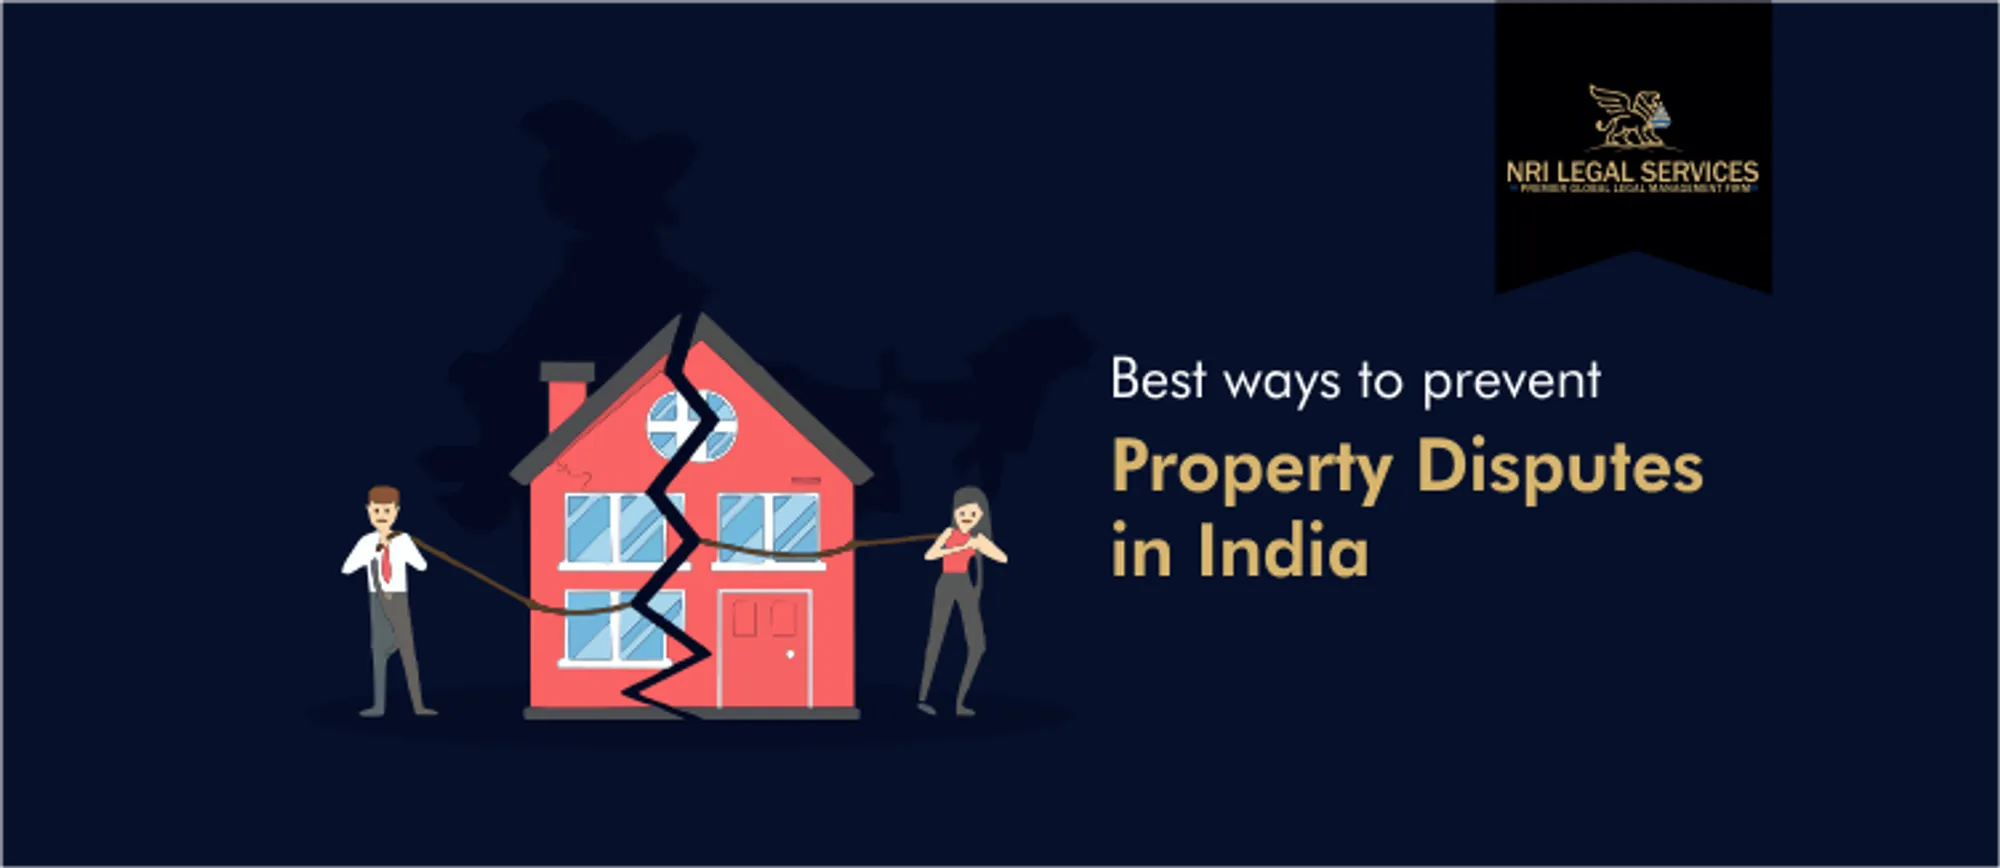 Prevent Property disputes in India